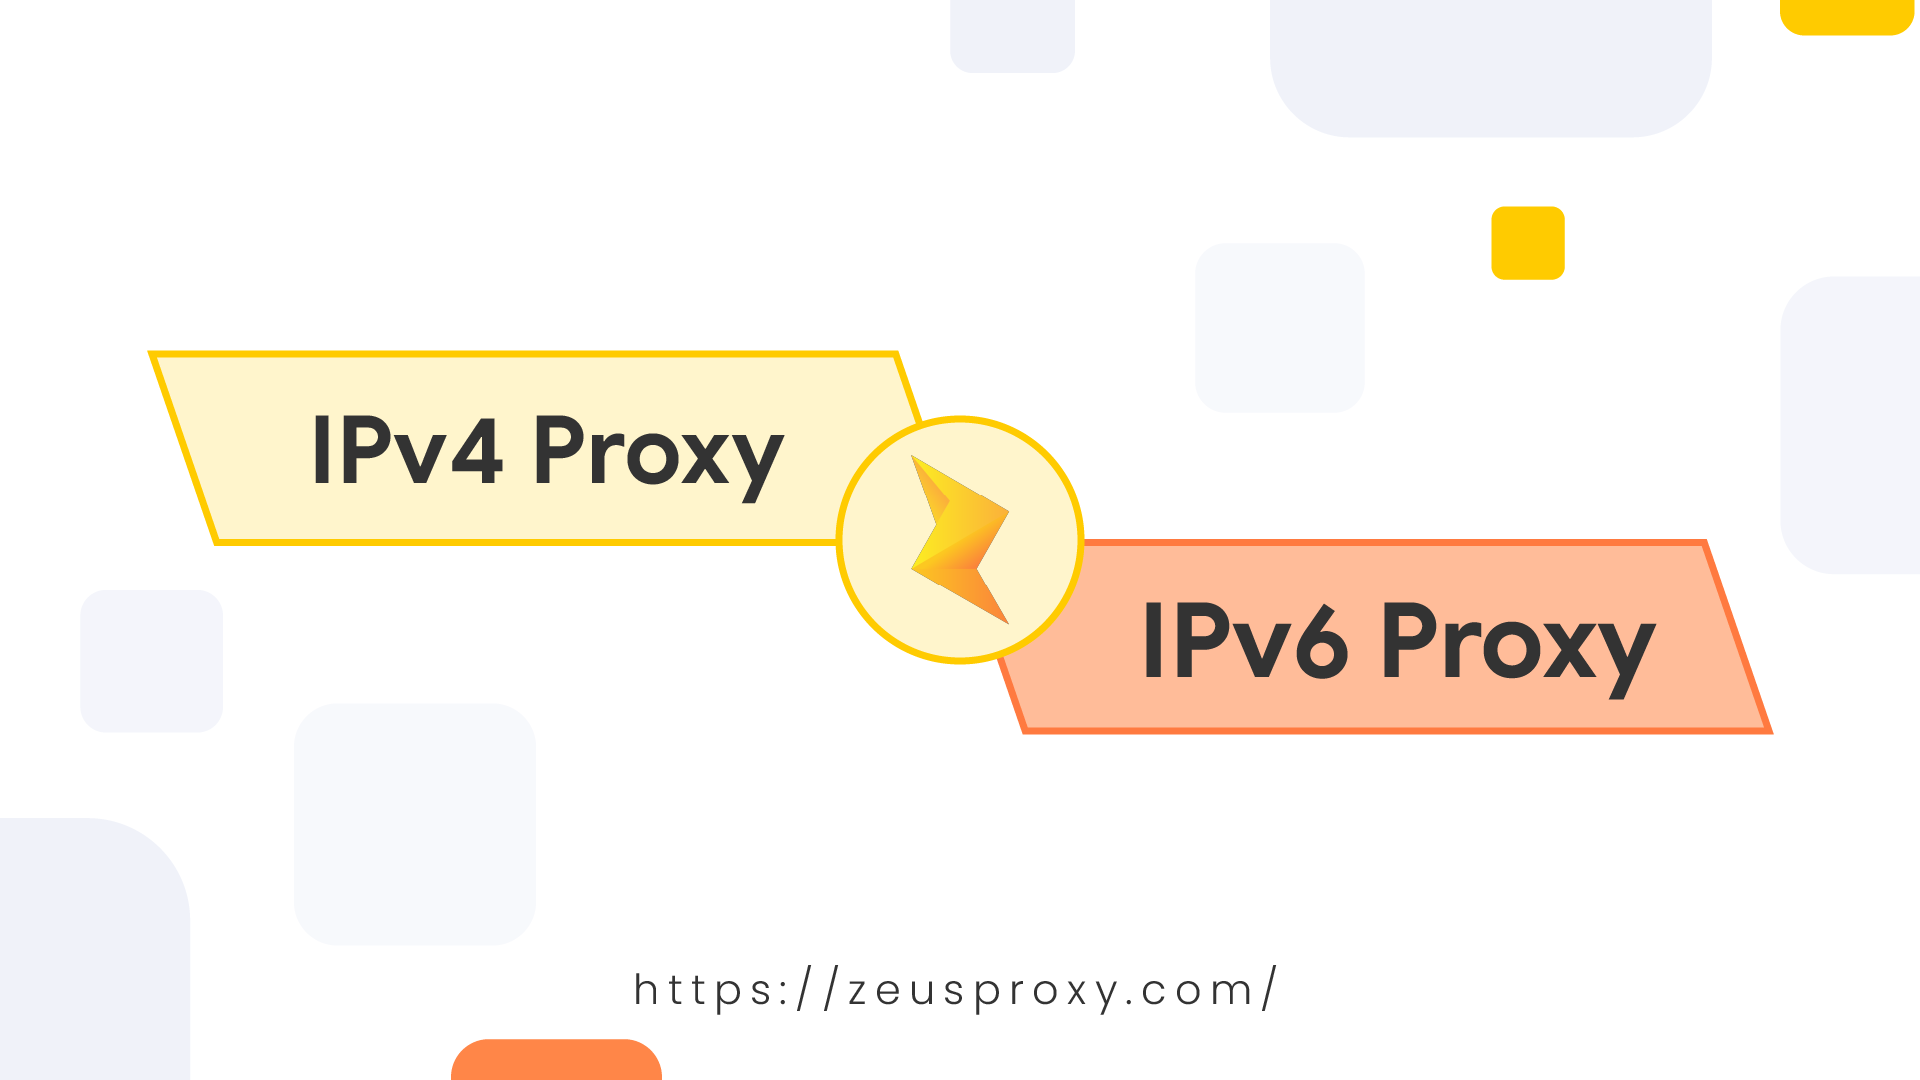 Why should you choose IPv4 over IPv6 proxies? Which one is better?